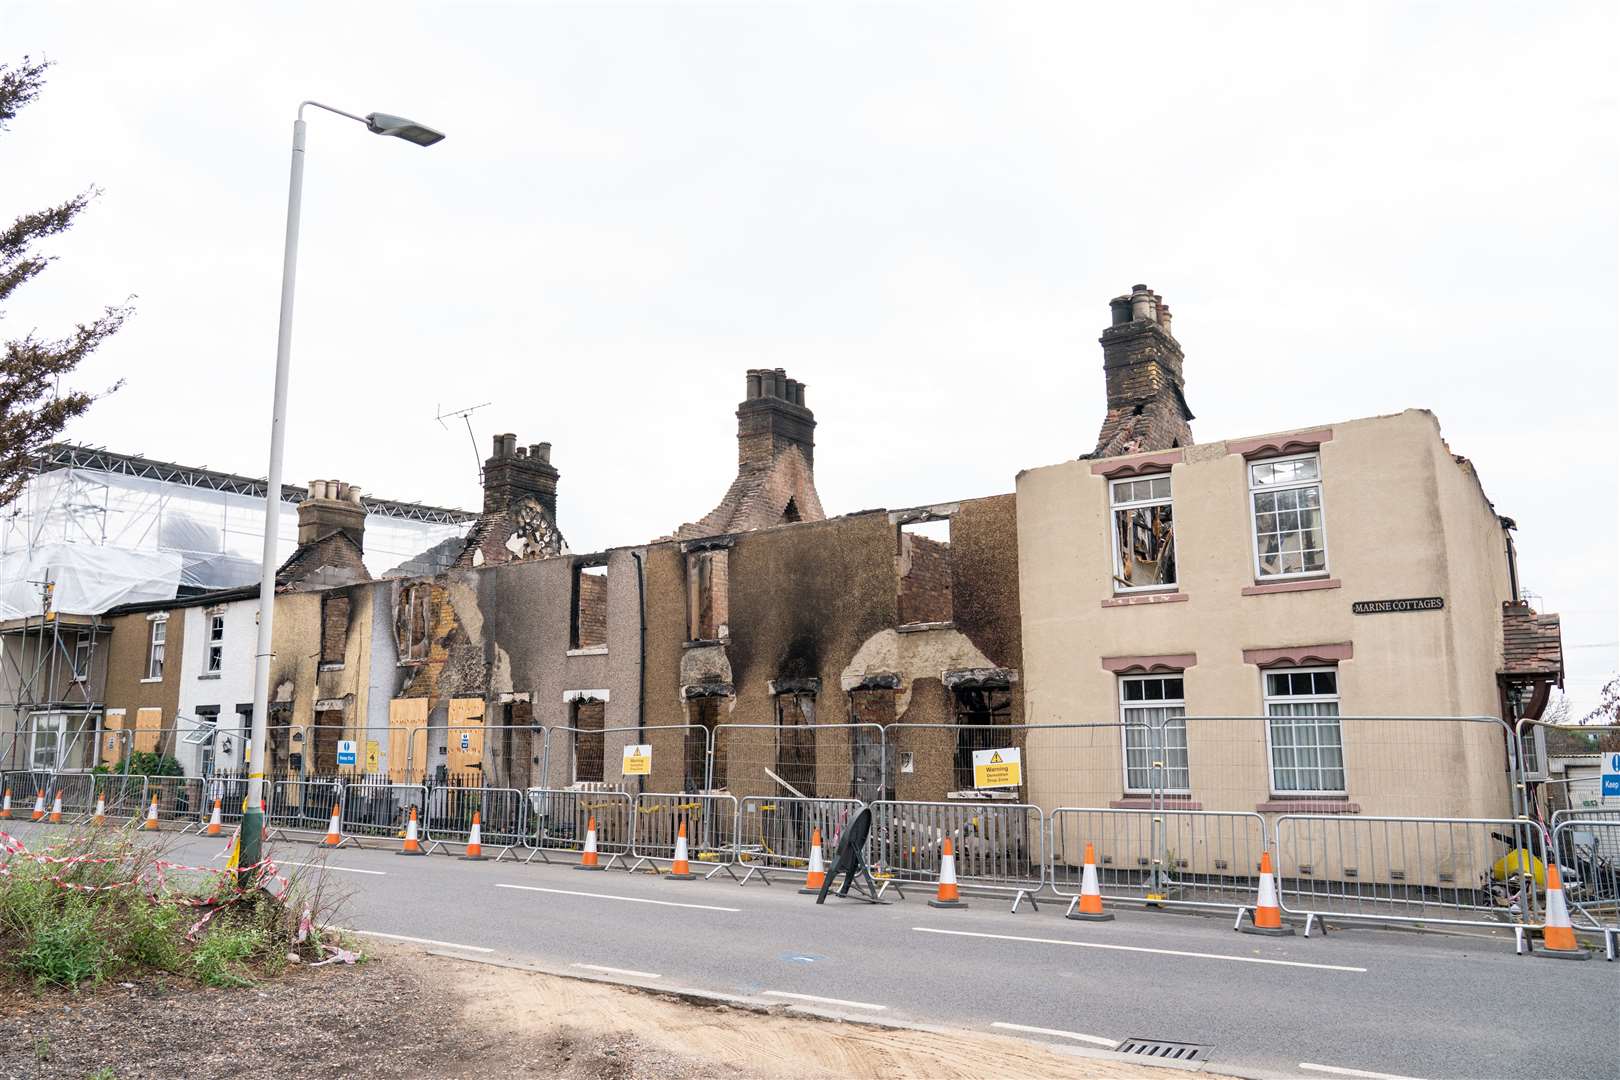 Fire-damaged homes in the village of Wennington in east London in the aftermath of the July 2022 heatwave (Dominic Lipinski/PA)